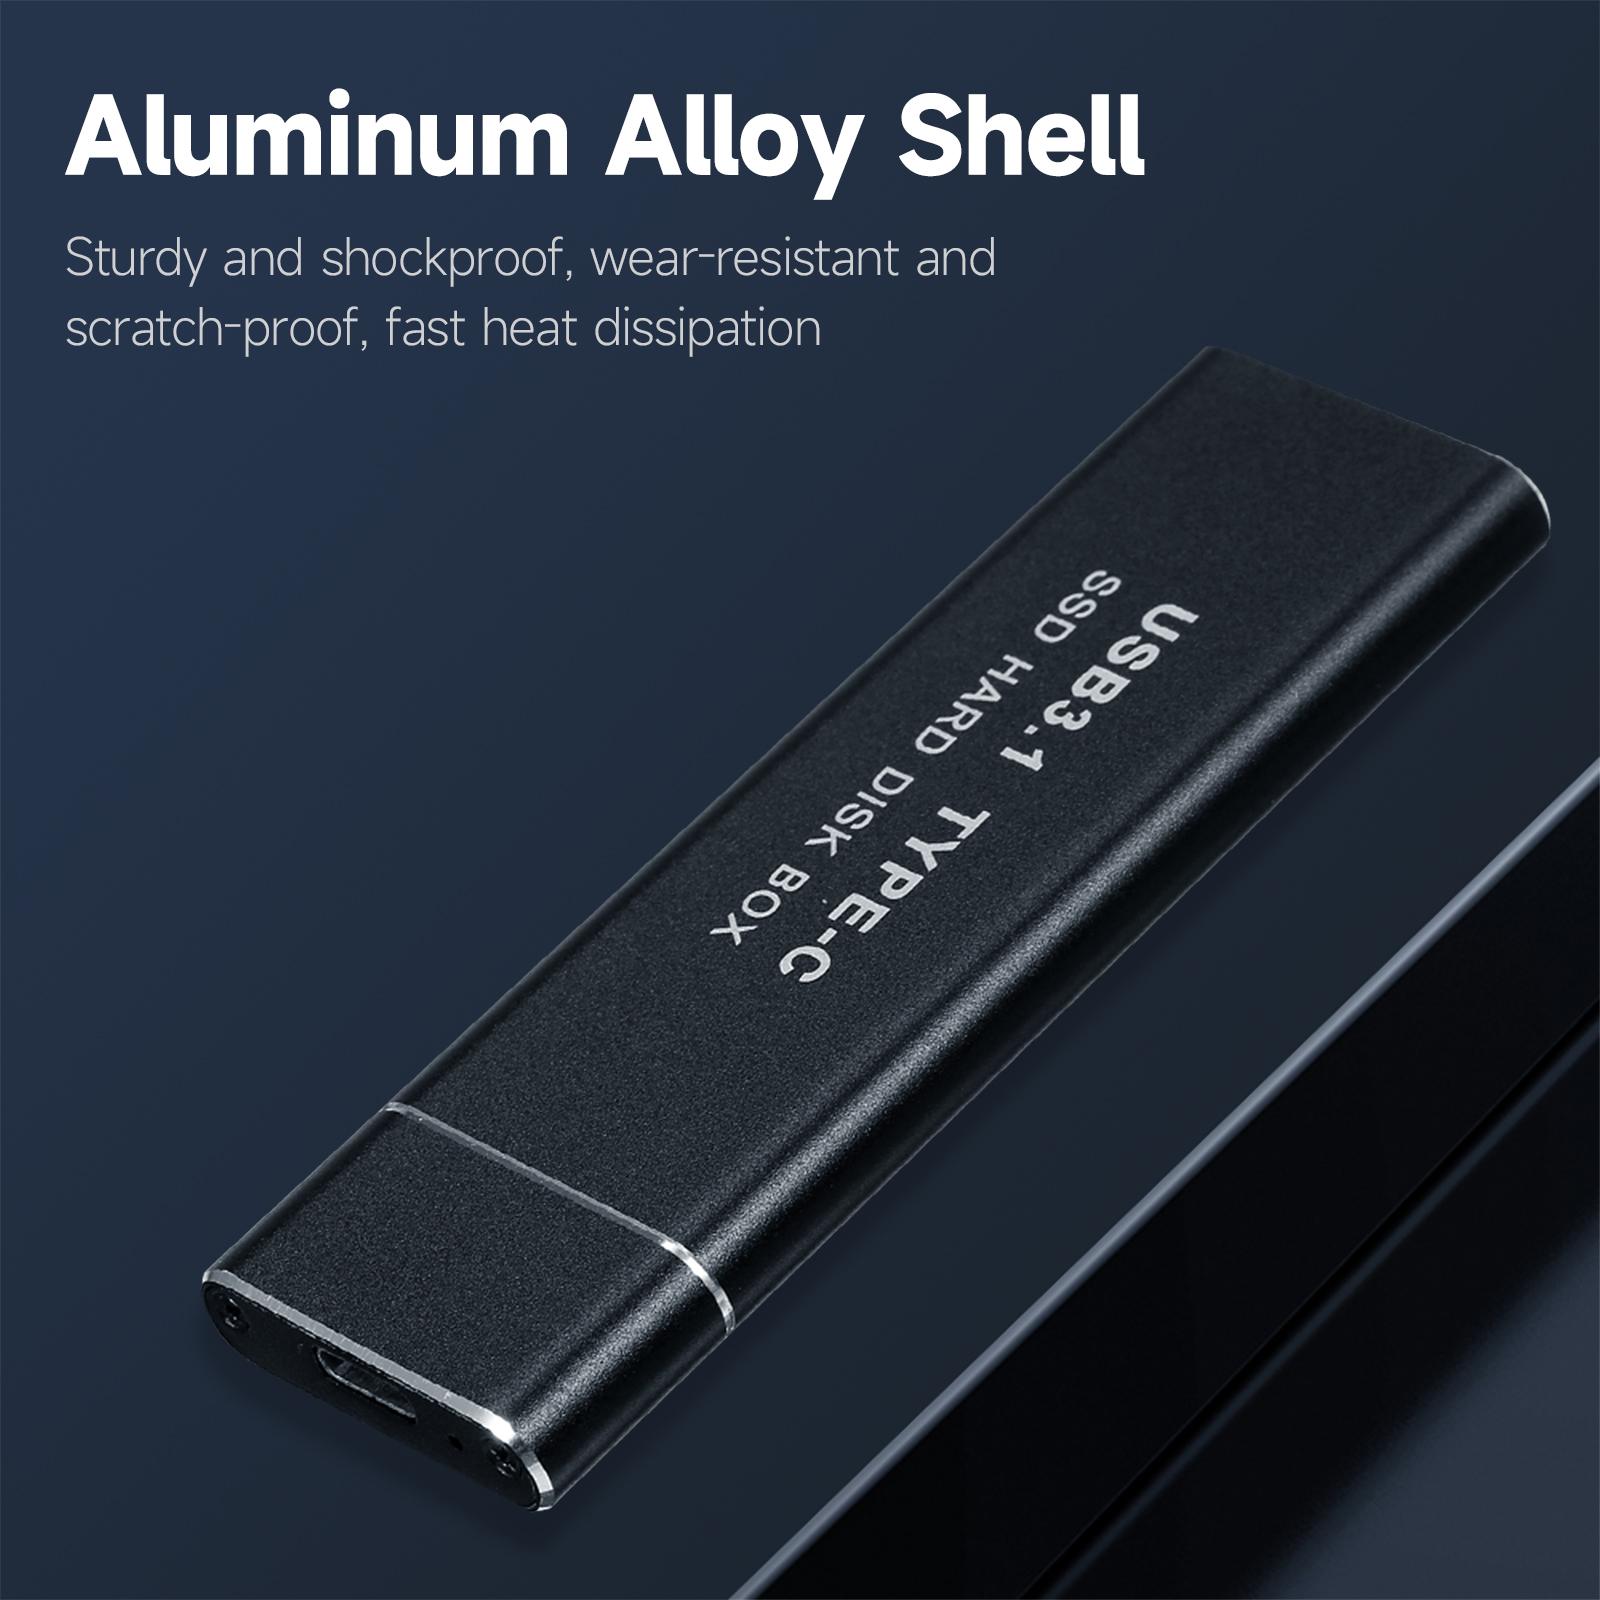 M.2 NVMe/SATA Dual Protocol Mobile Hard Disk Case USB3.1 Type-C External SSD Enclosure Aluminum Alloy Shell(only Shell)